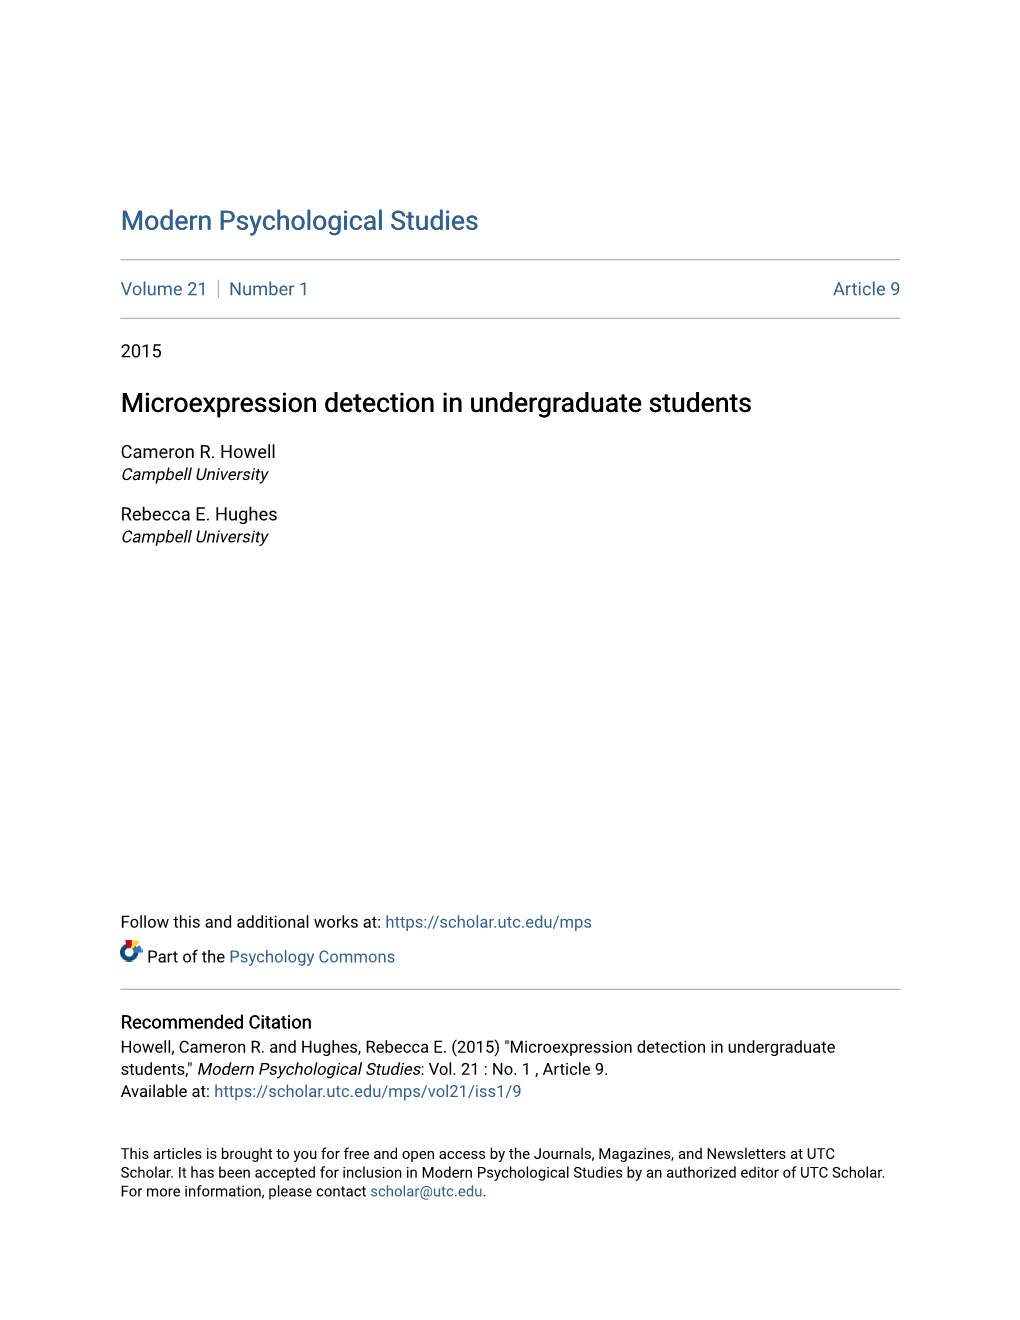 Microexpression Detection in Undergraduate Students